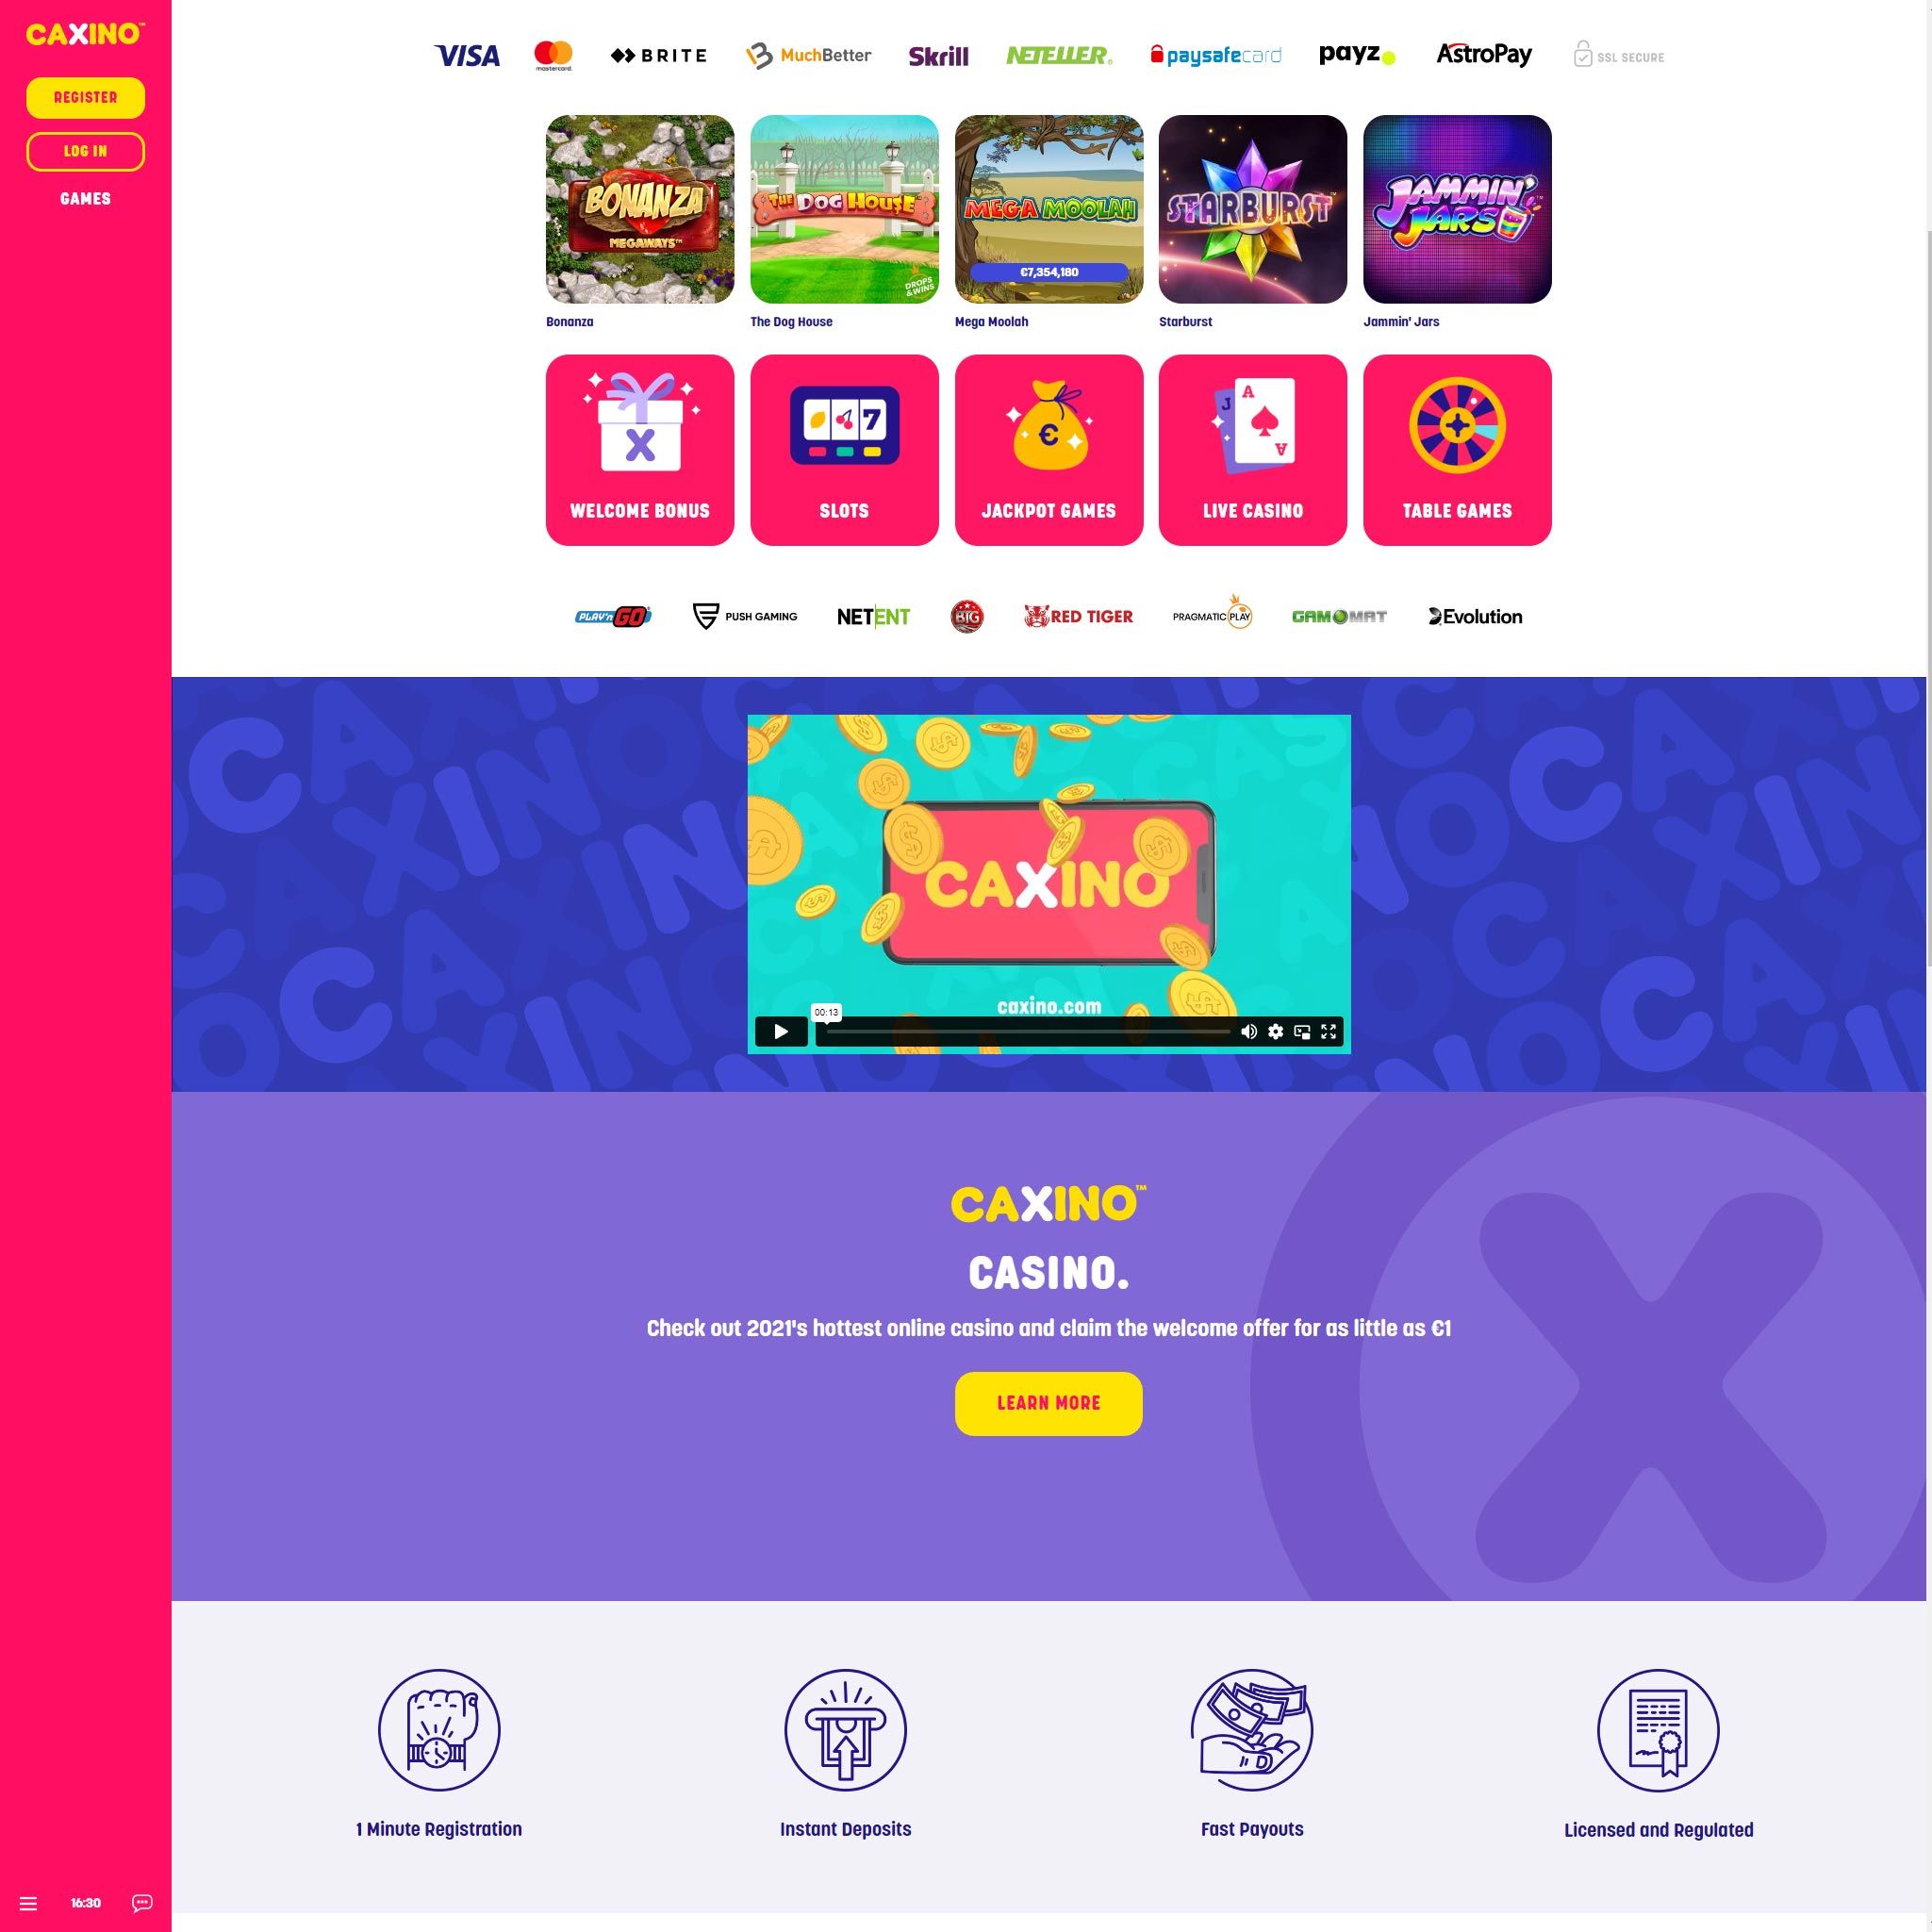 Caxino Casino review by Mr. Gamble